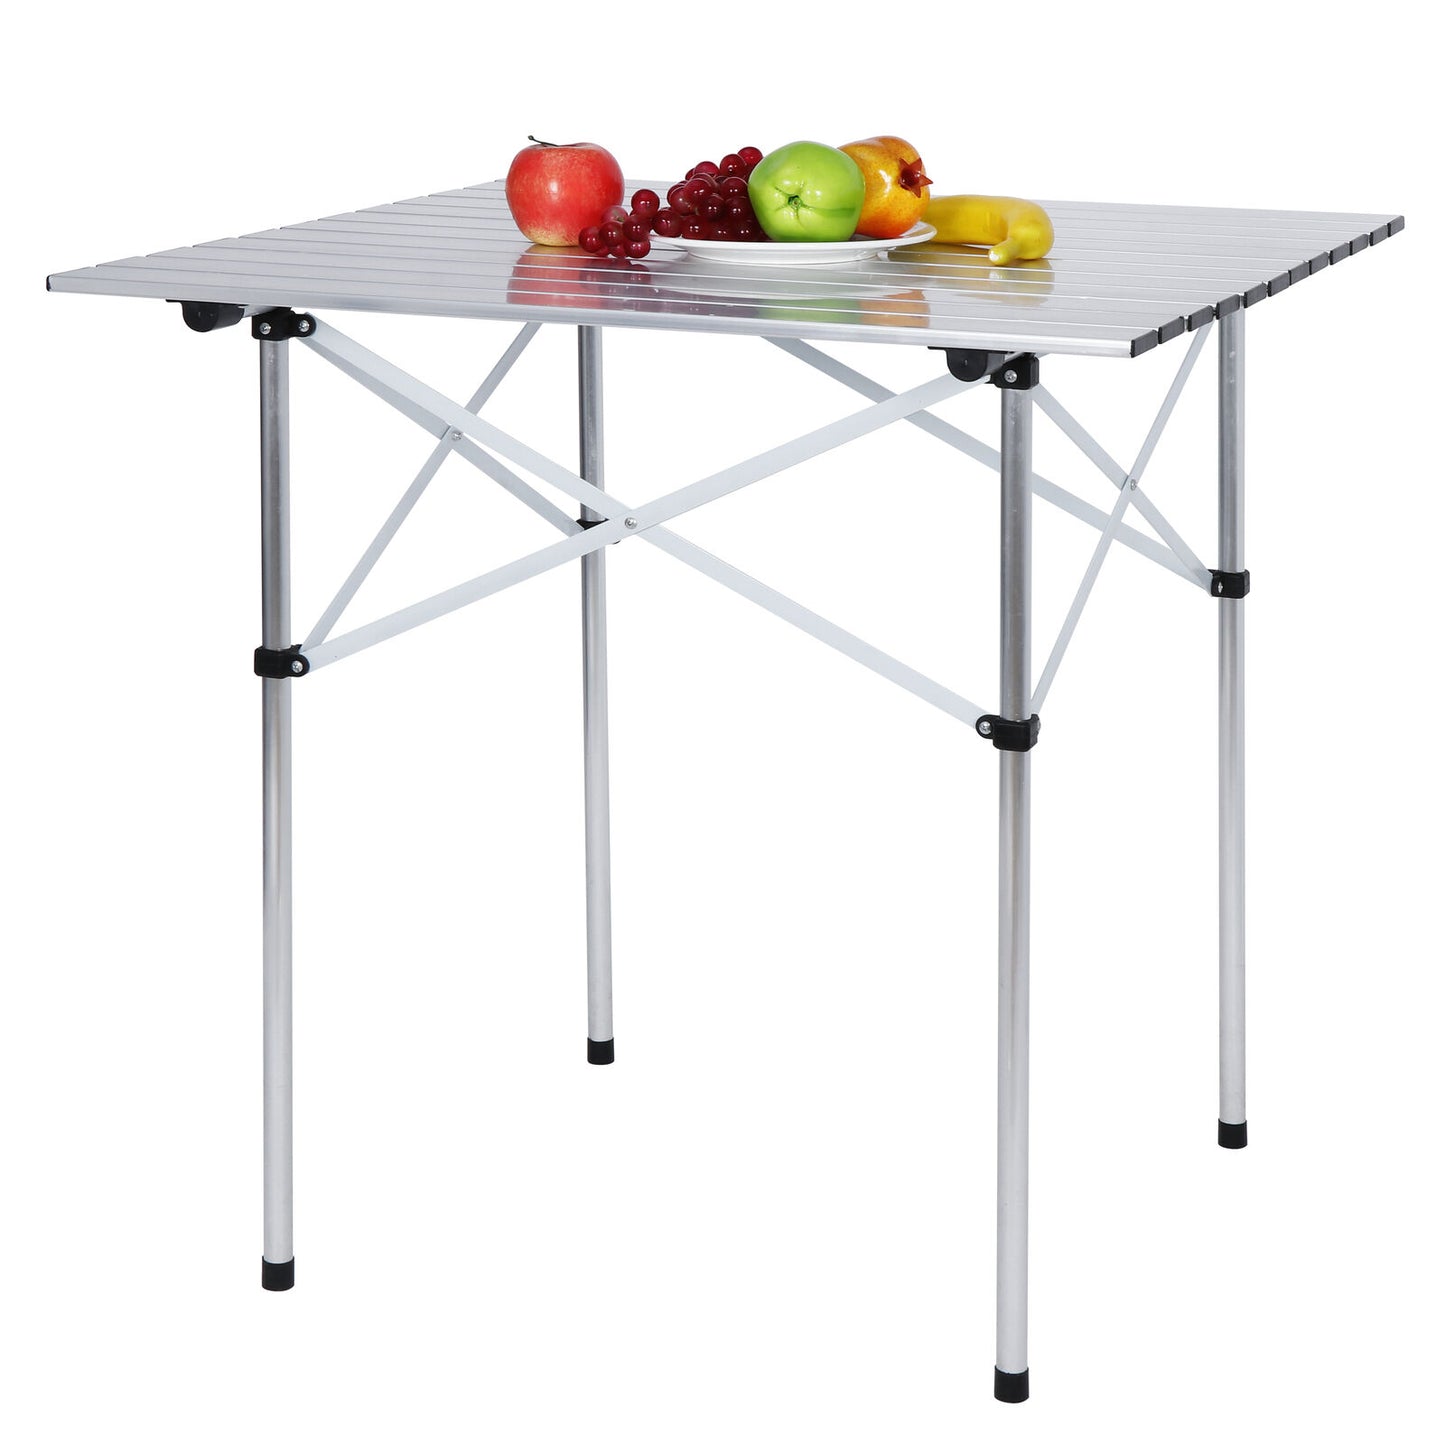 Folding Camping Table Portable Ultralight Aluminum Table with Storage Bag